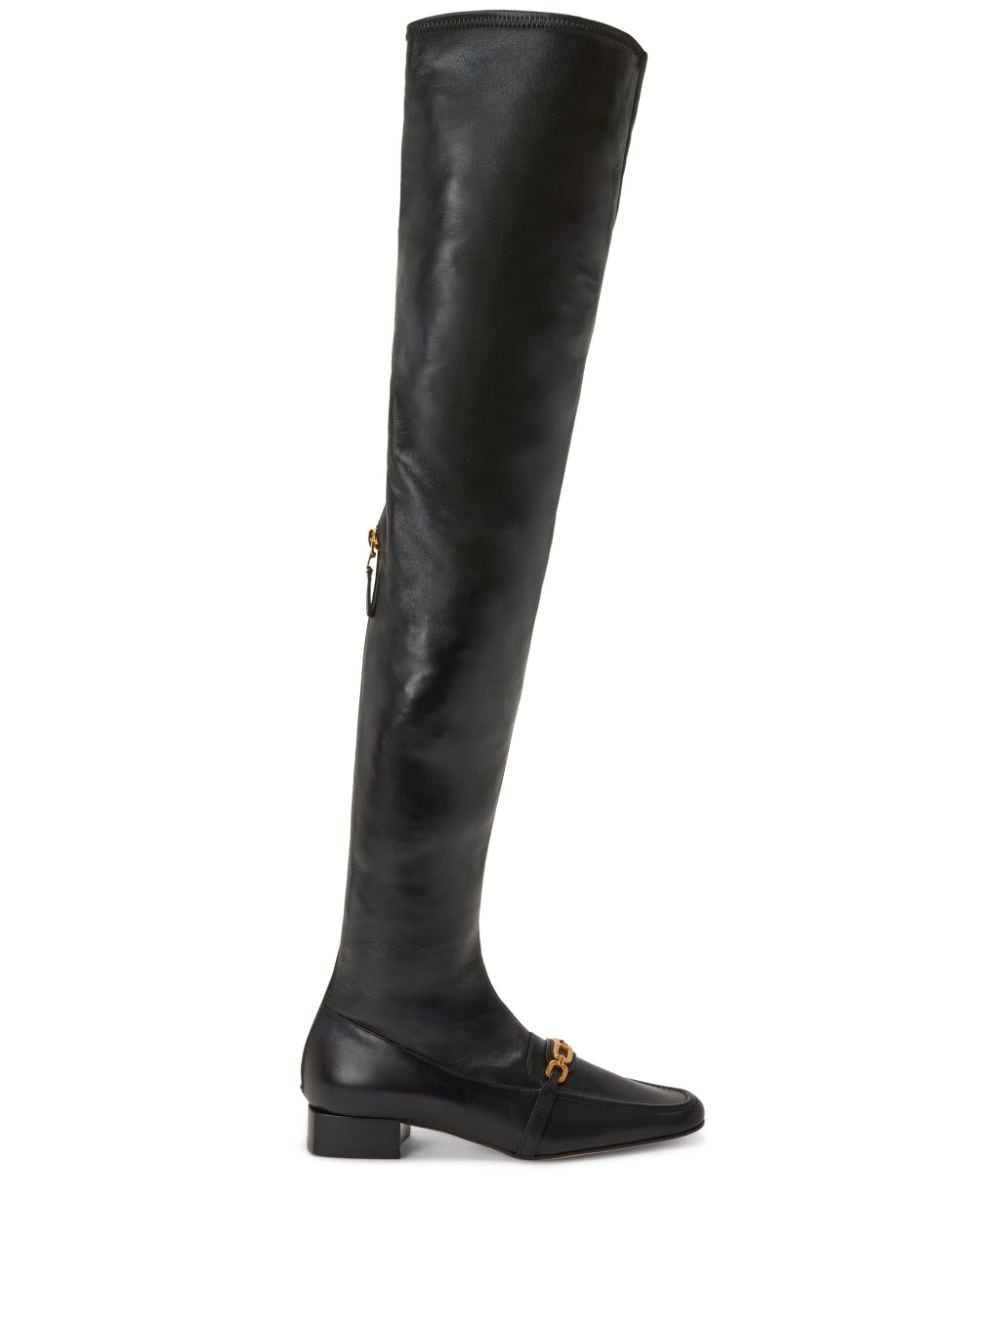 TOM FORD over-the-knee 25mm leather boots - Black von TOM FORD